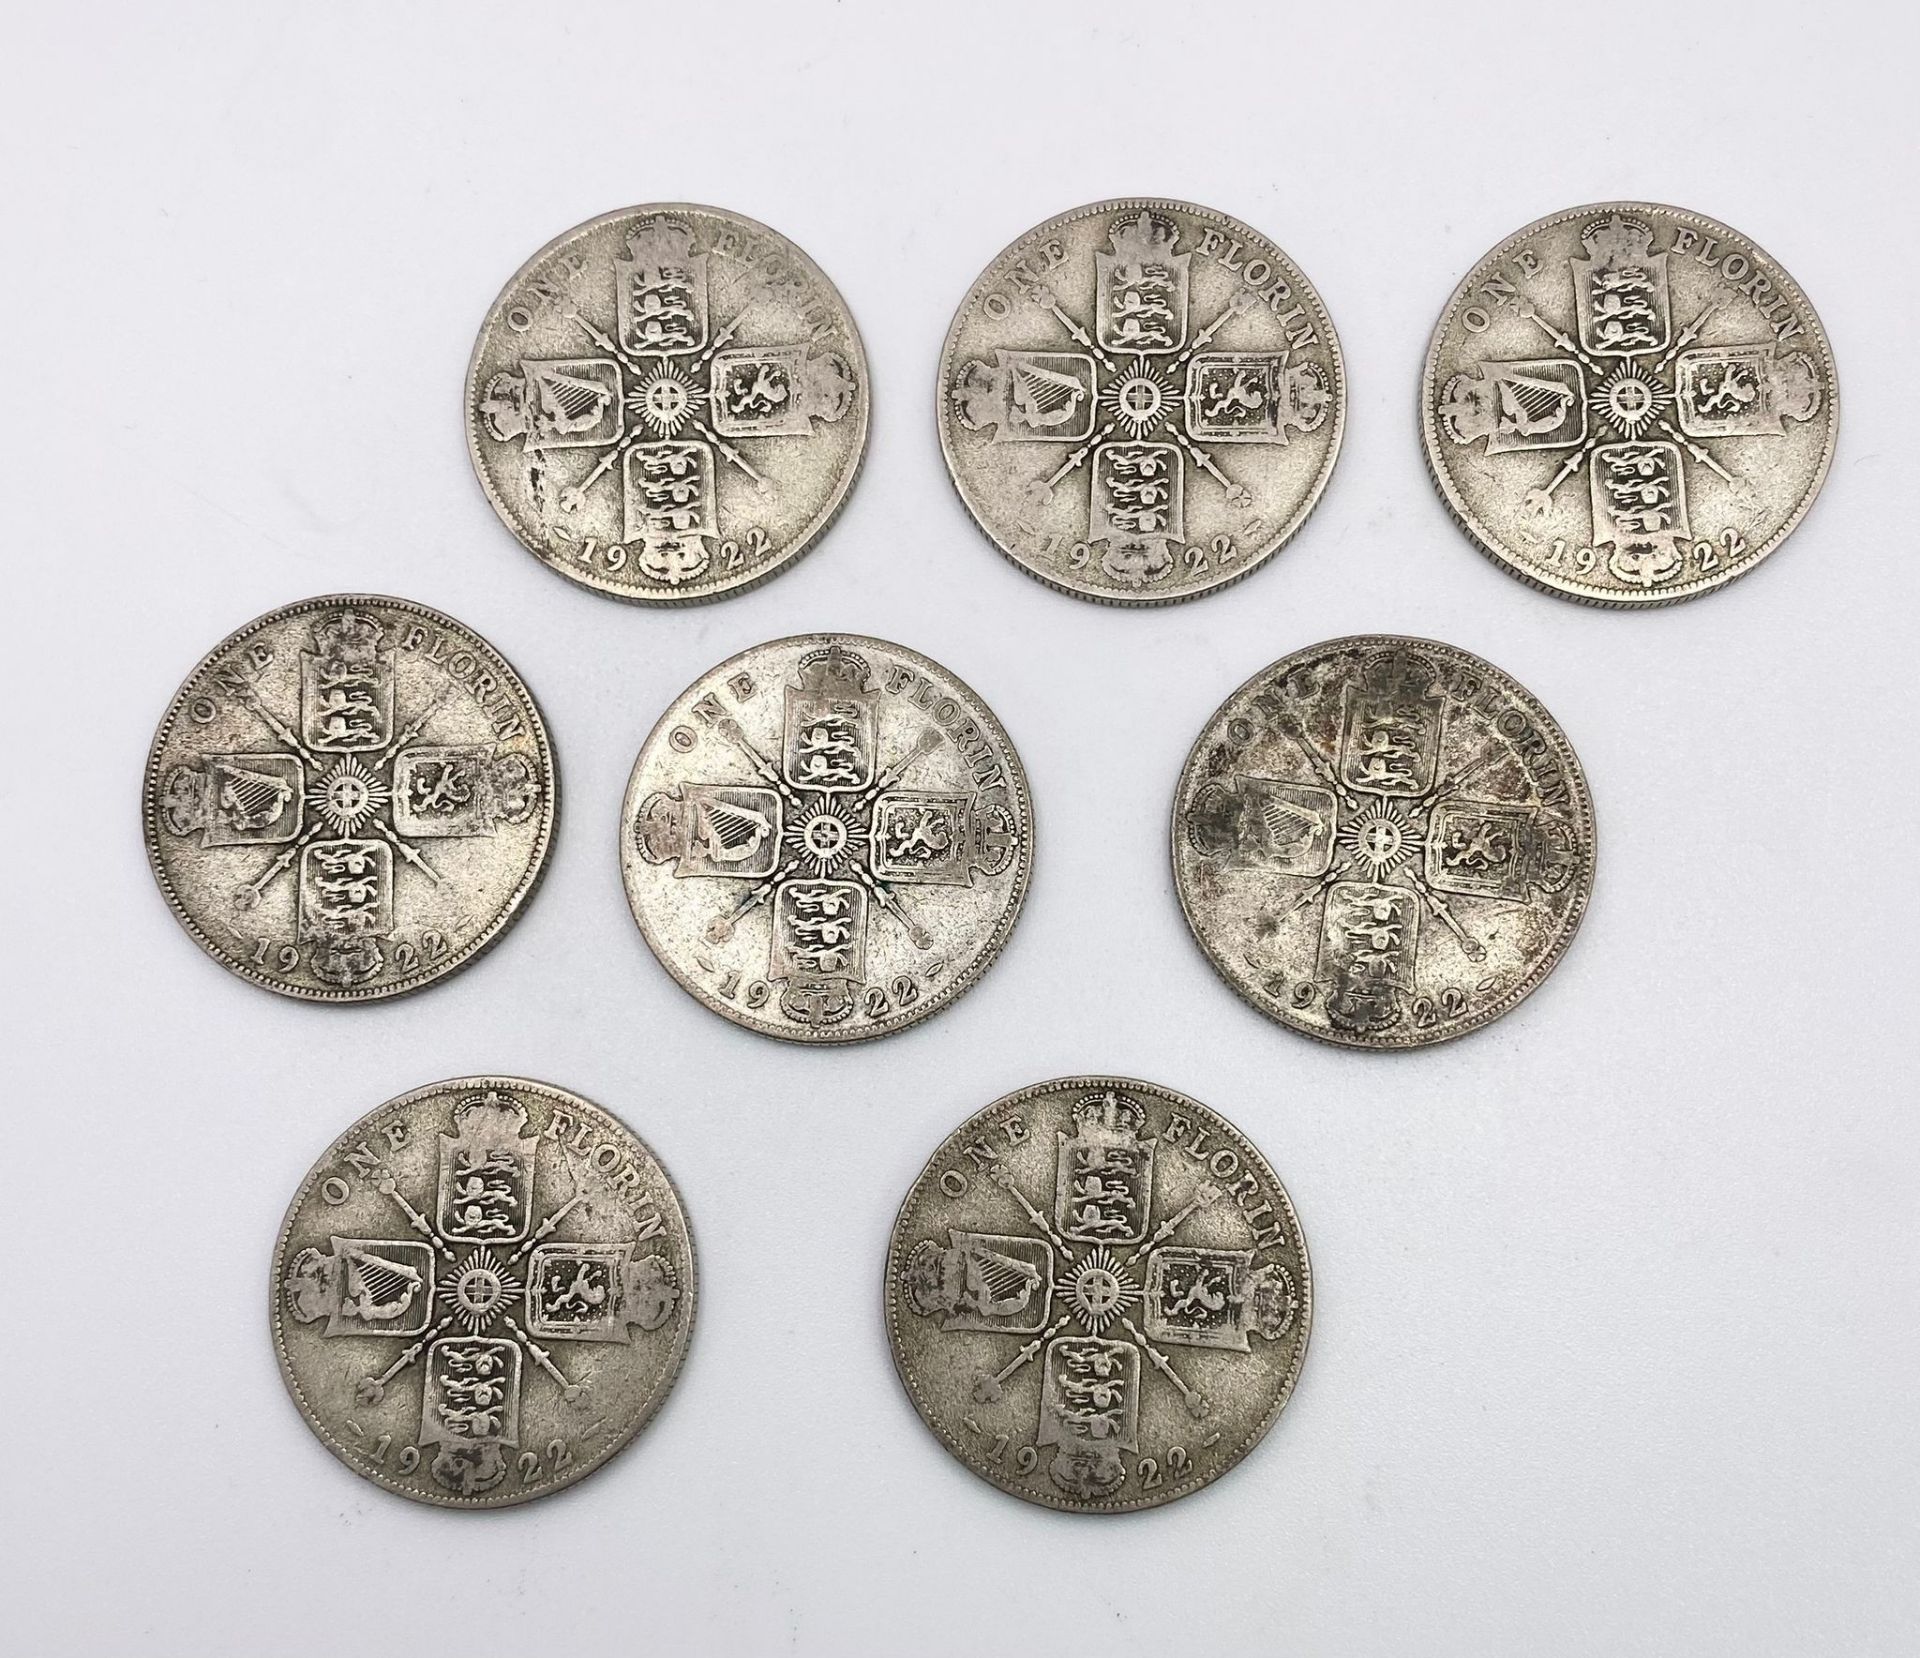 A Set of 8 British Florin Coins, All Dated 1922, Fair to Good Condition. Total Weight 88 grams